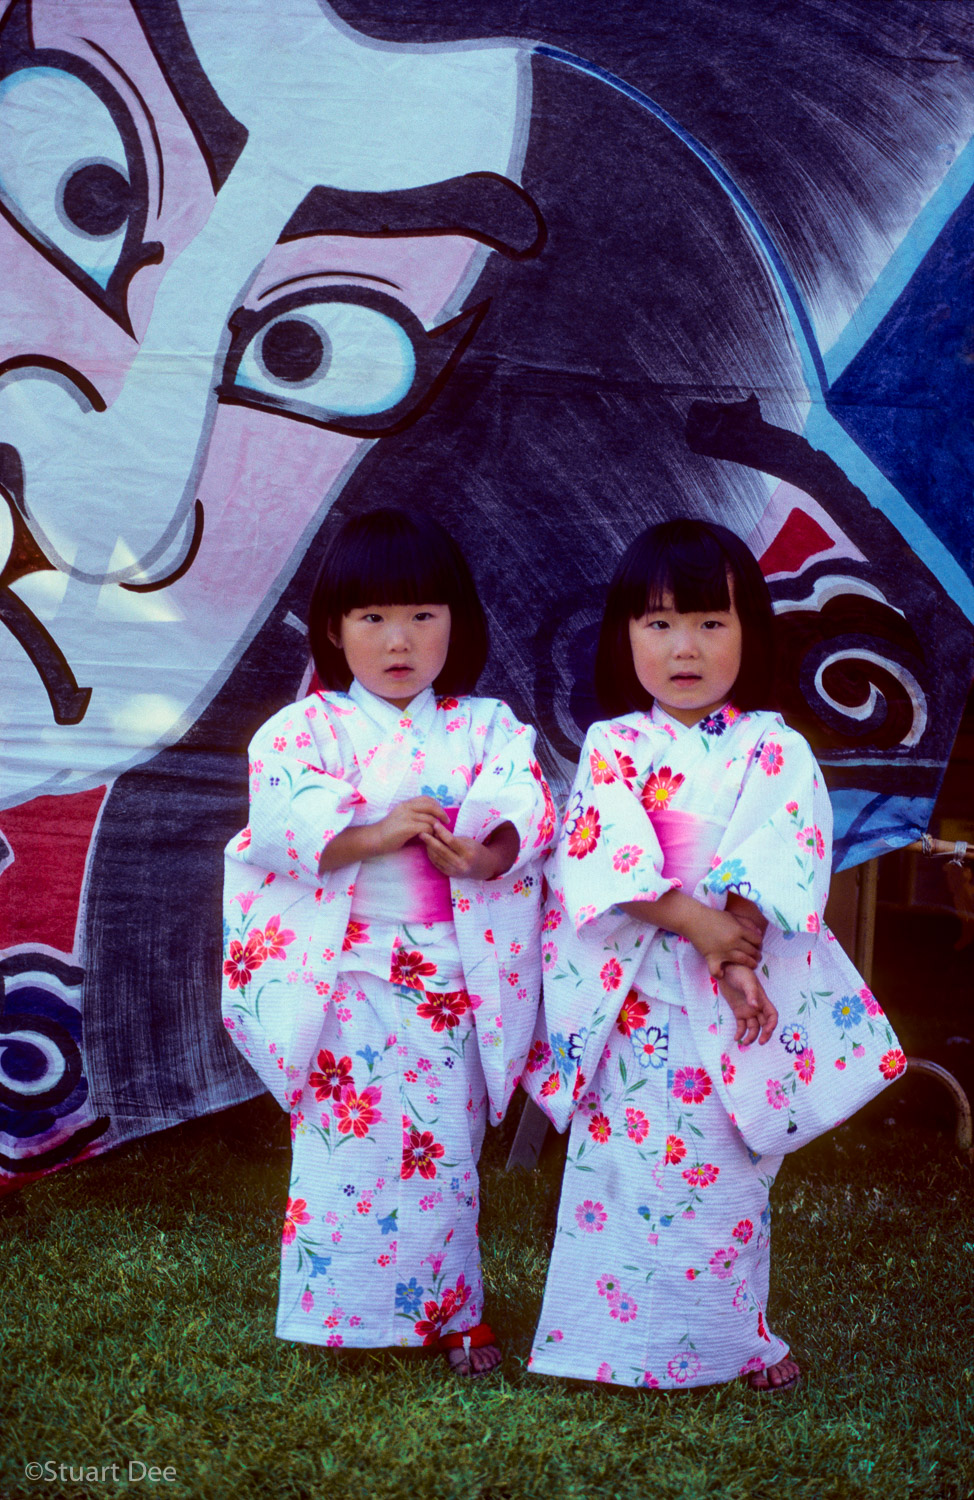  Twin Japanese girls at a Japanese festival, with a large picture of Japanese face staring at them from the background. 